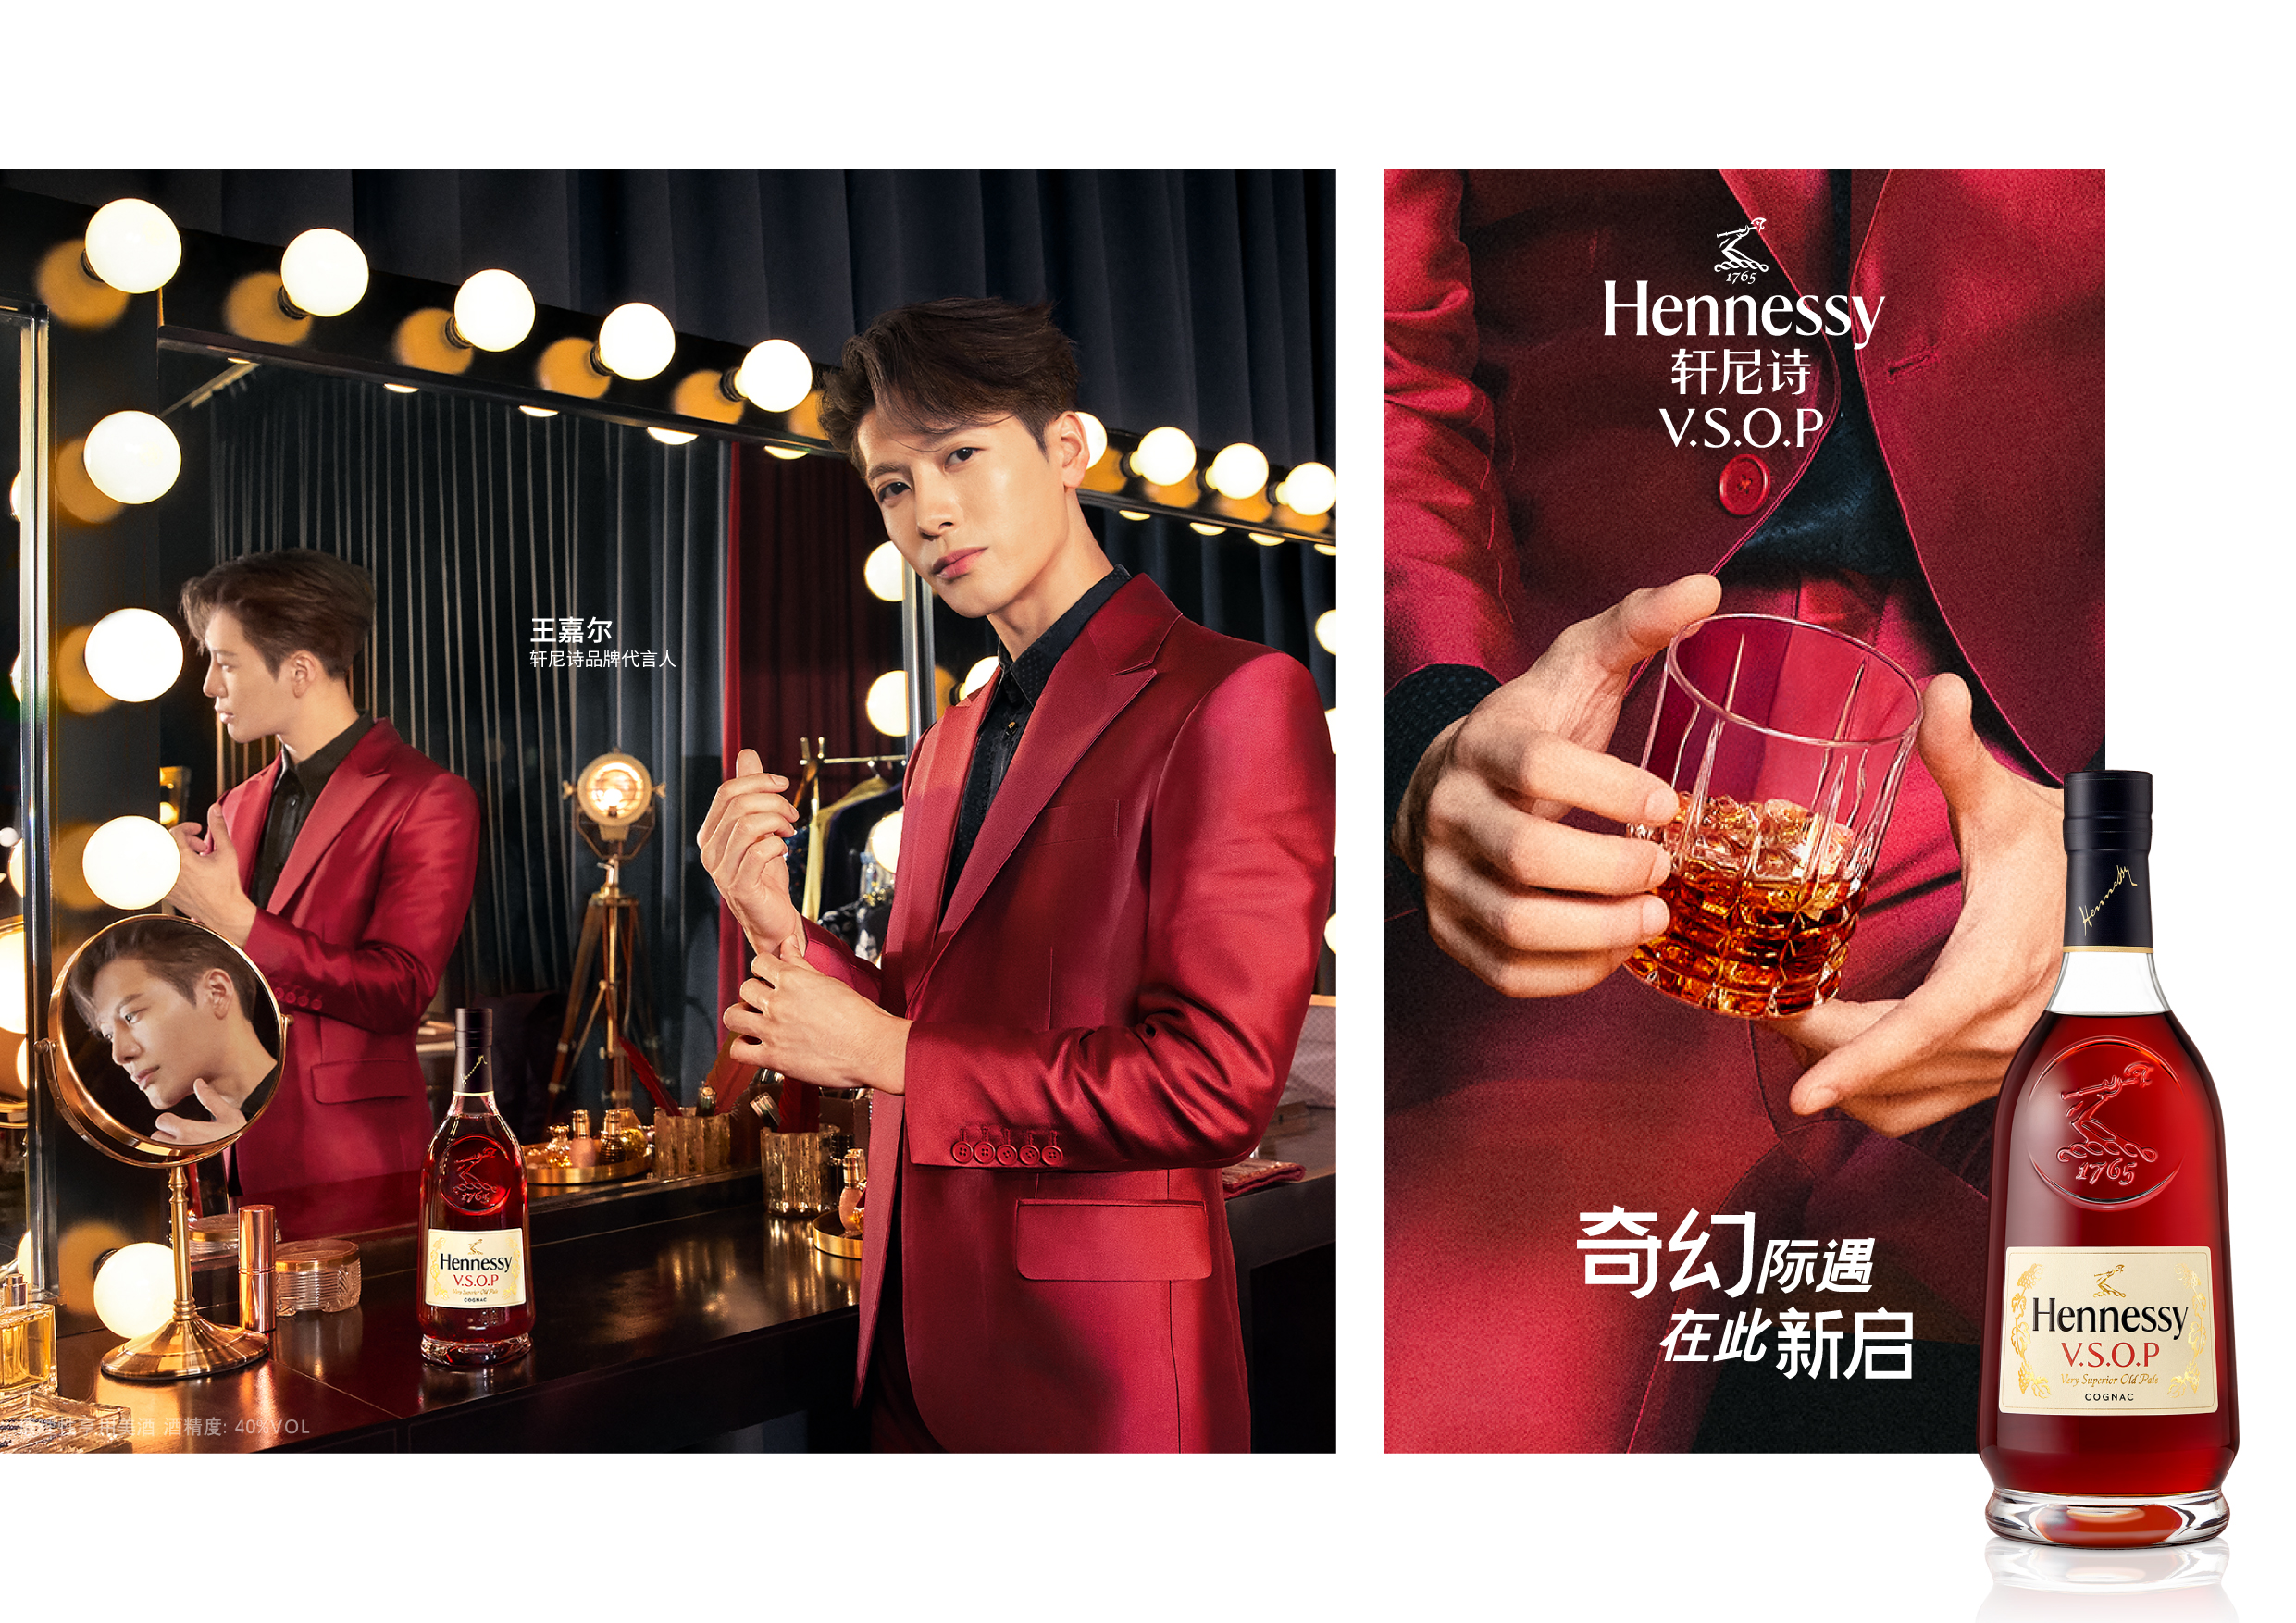 Moët Hennessy USA, celebrities team up for WISH-SHOP, 2020-11-30